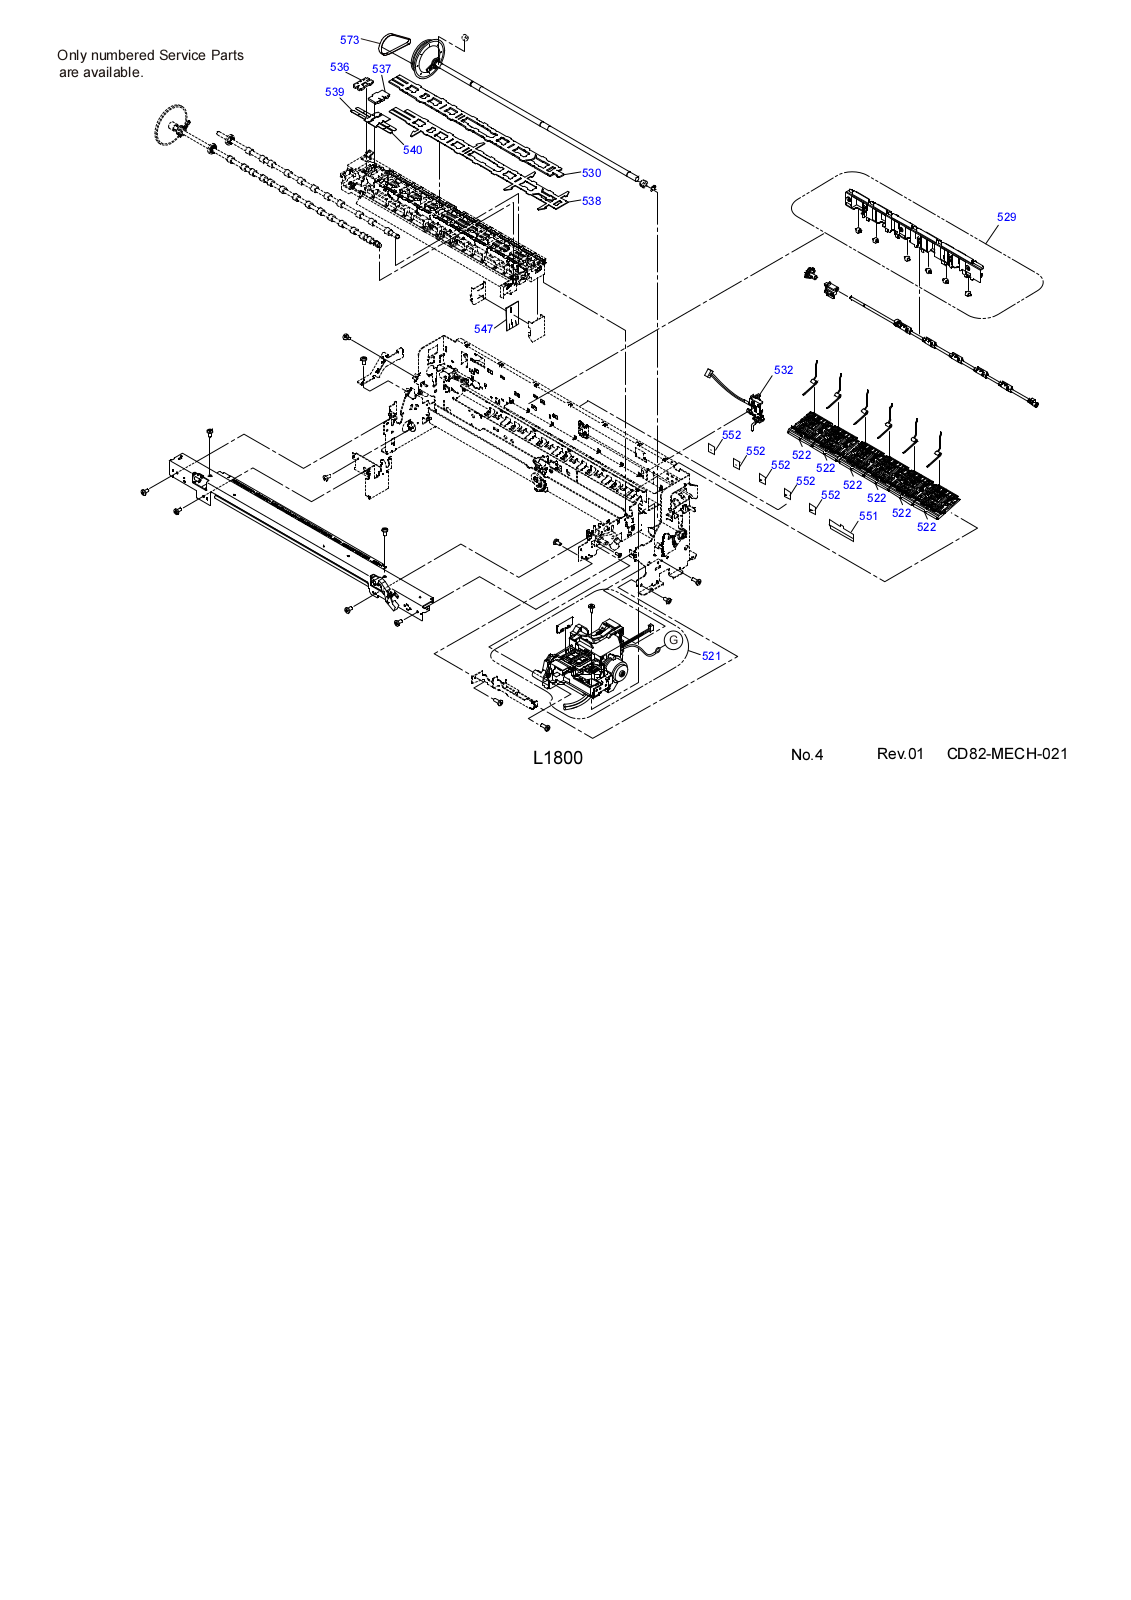 Epson L1800 Exploded Diagrams 4